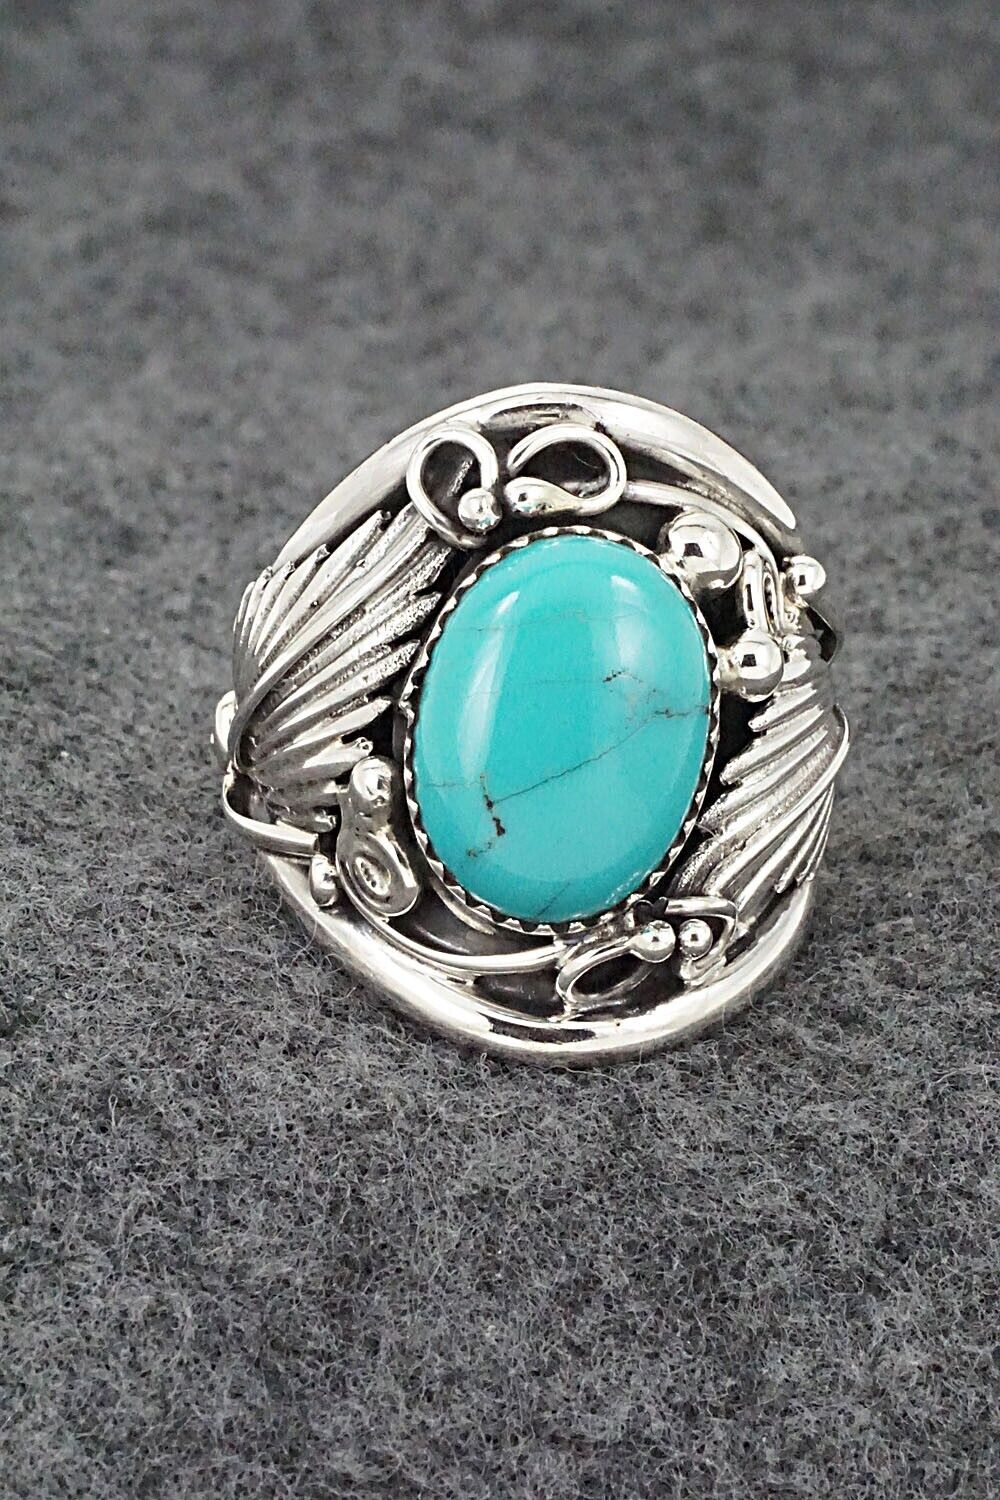 Turquoise & Sterling Silver Ring - Jeannette Saunders - Size 11